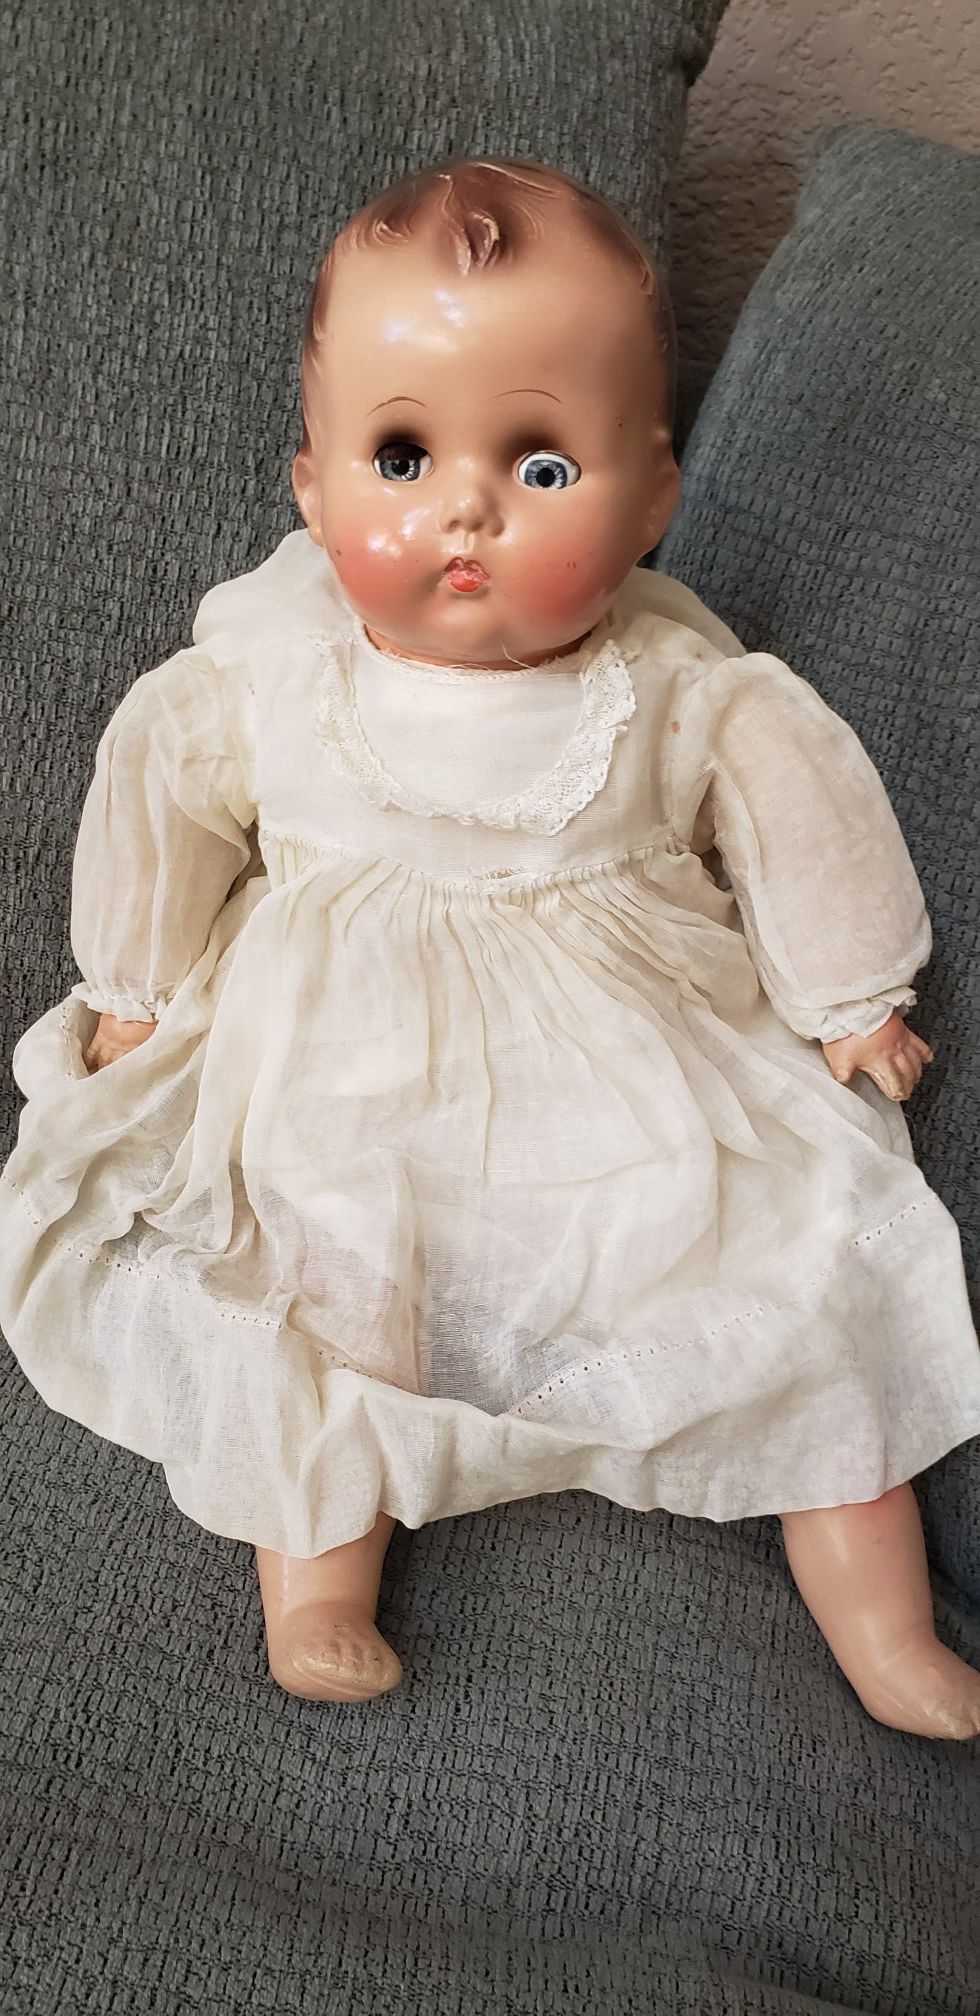 Antique Baby Doll with soft body